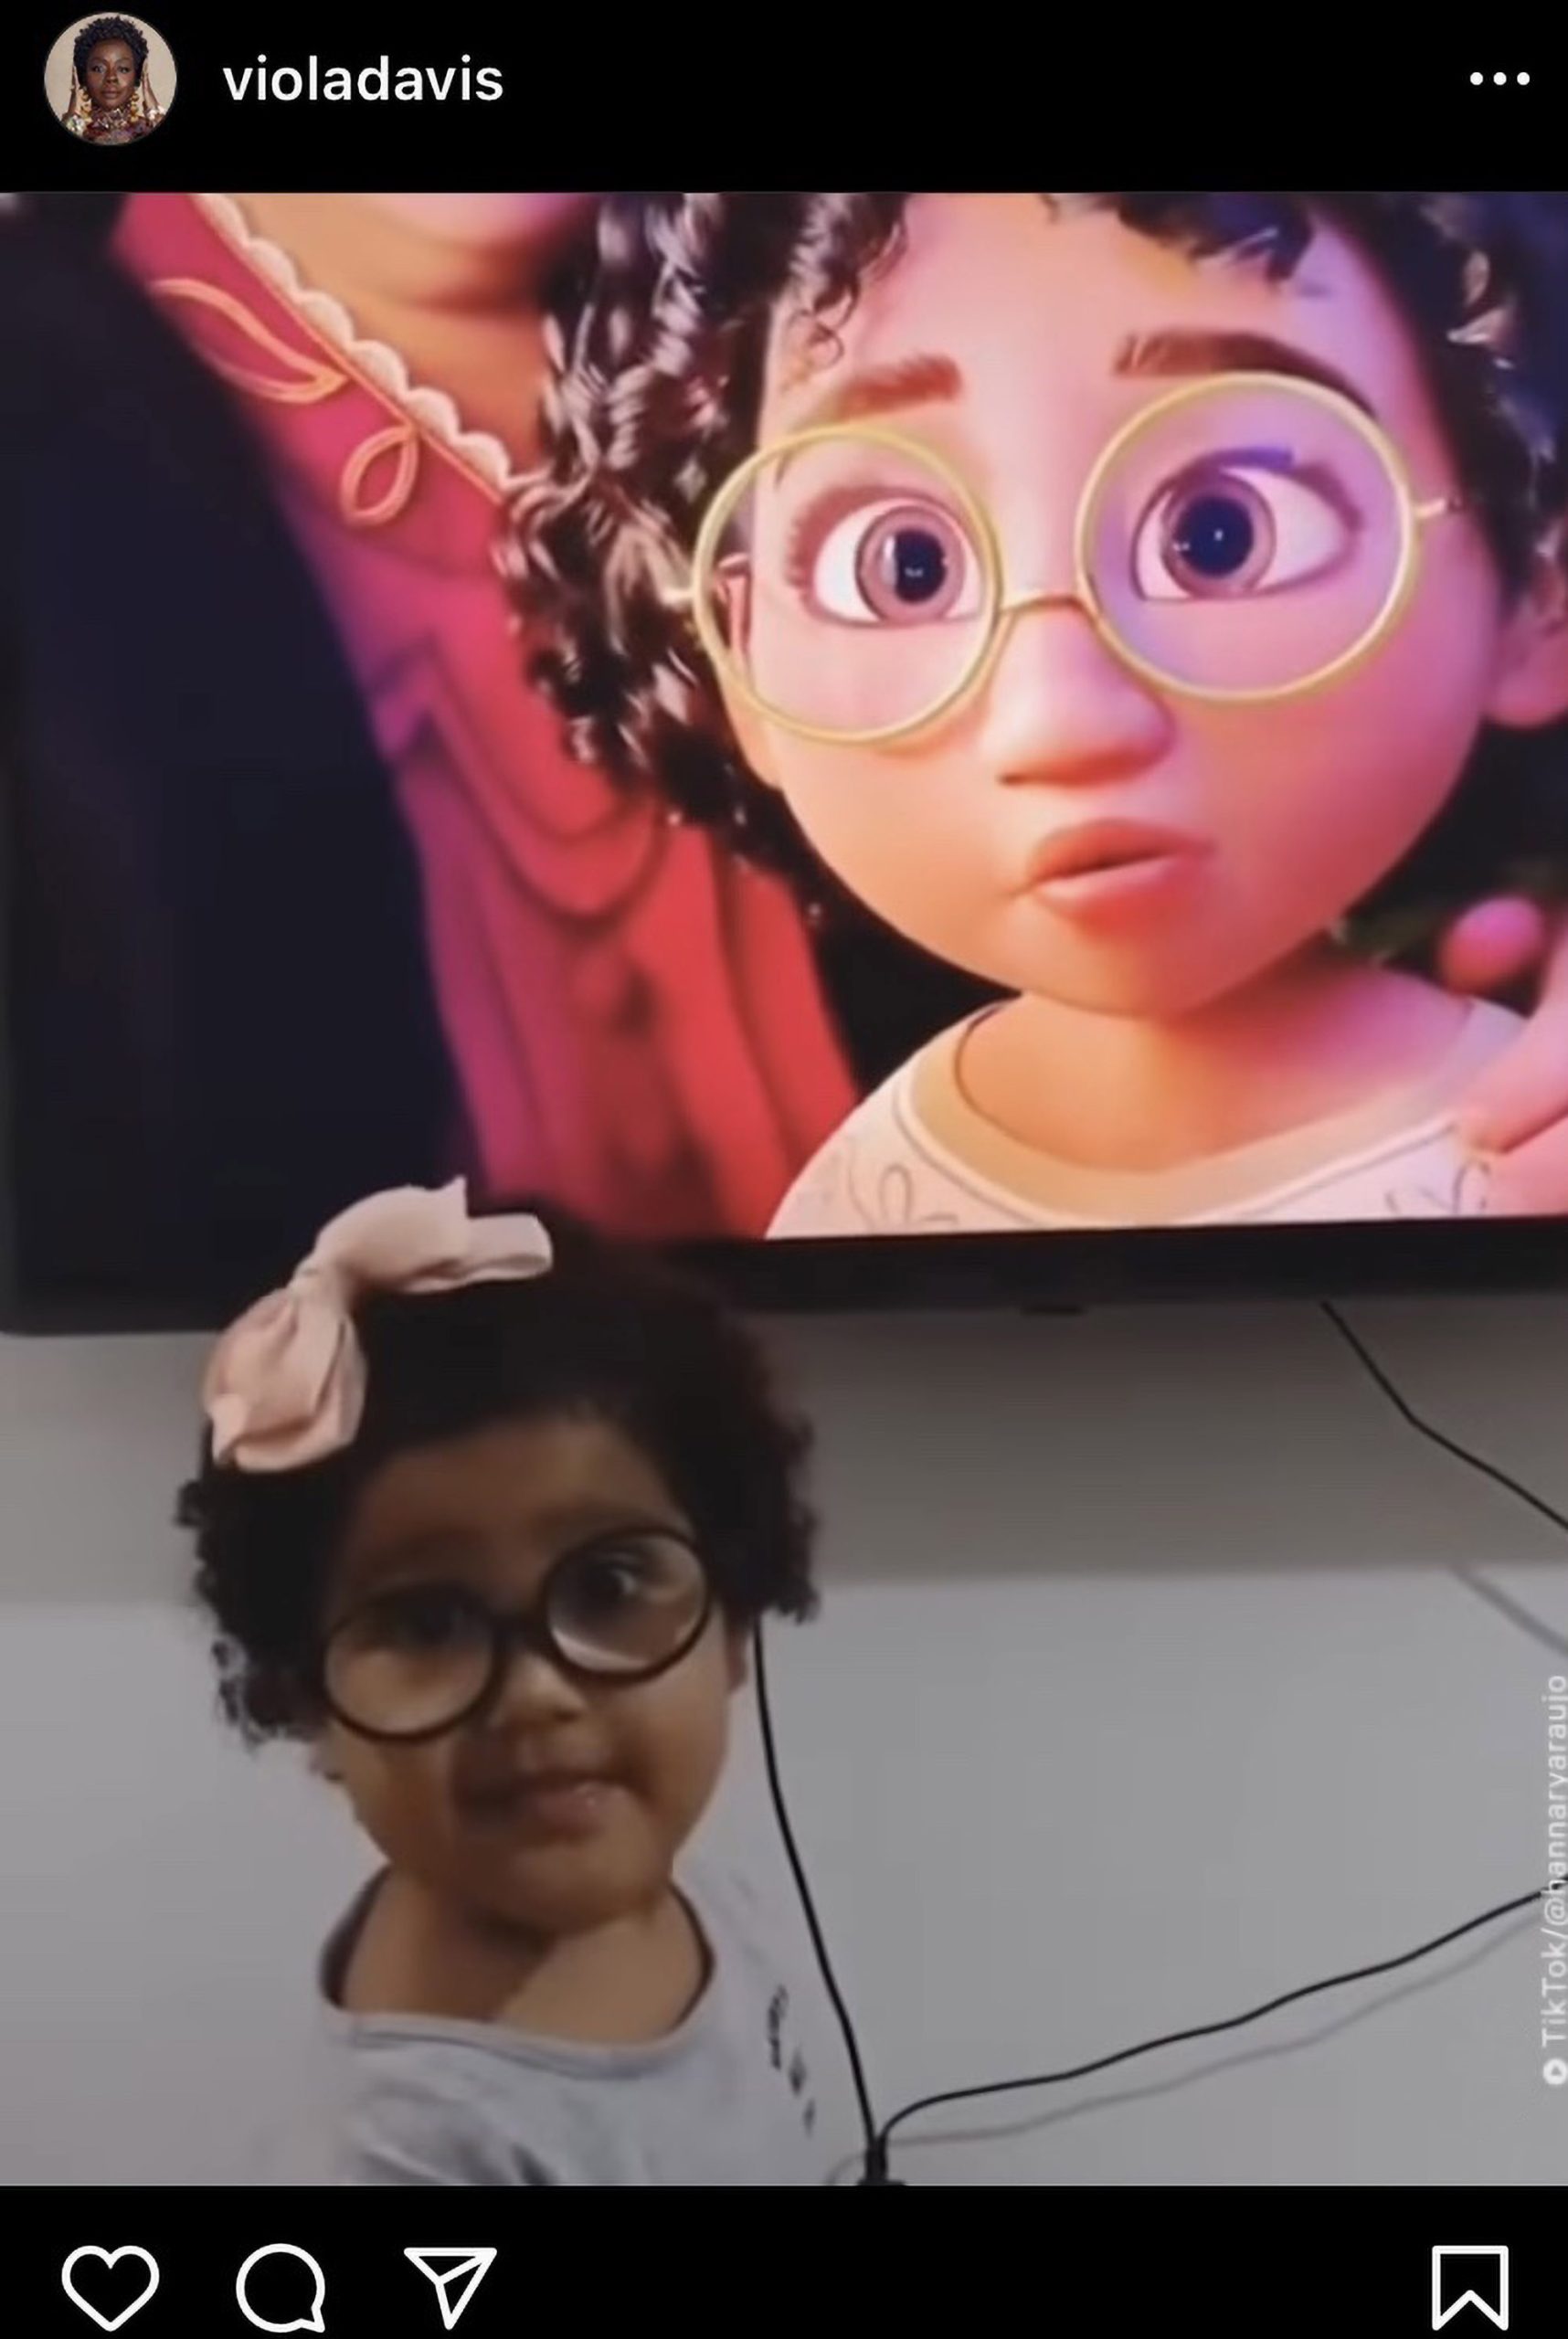 Read more about the article Brazilian Girl Goes Viral After US Star Viola Davis Shares Clip Of Her Realising Disney POC Character Is Her Double